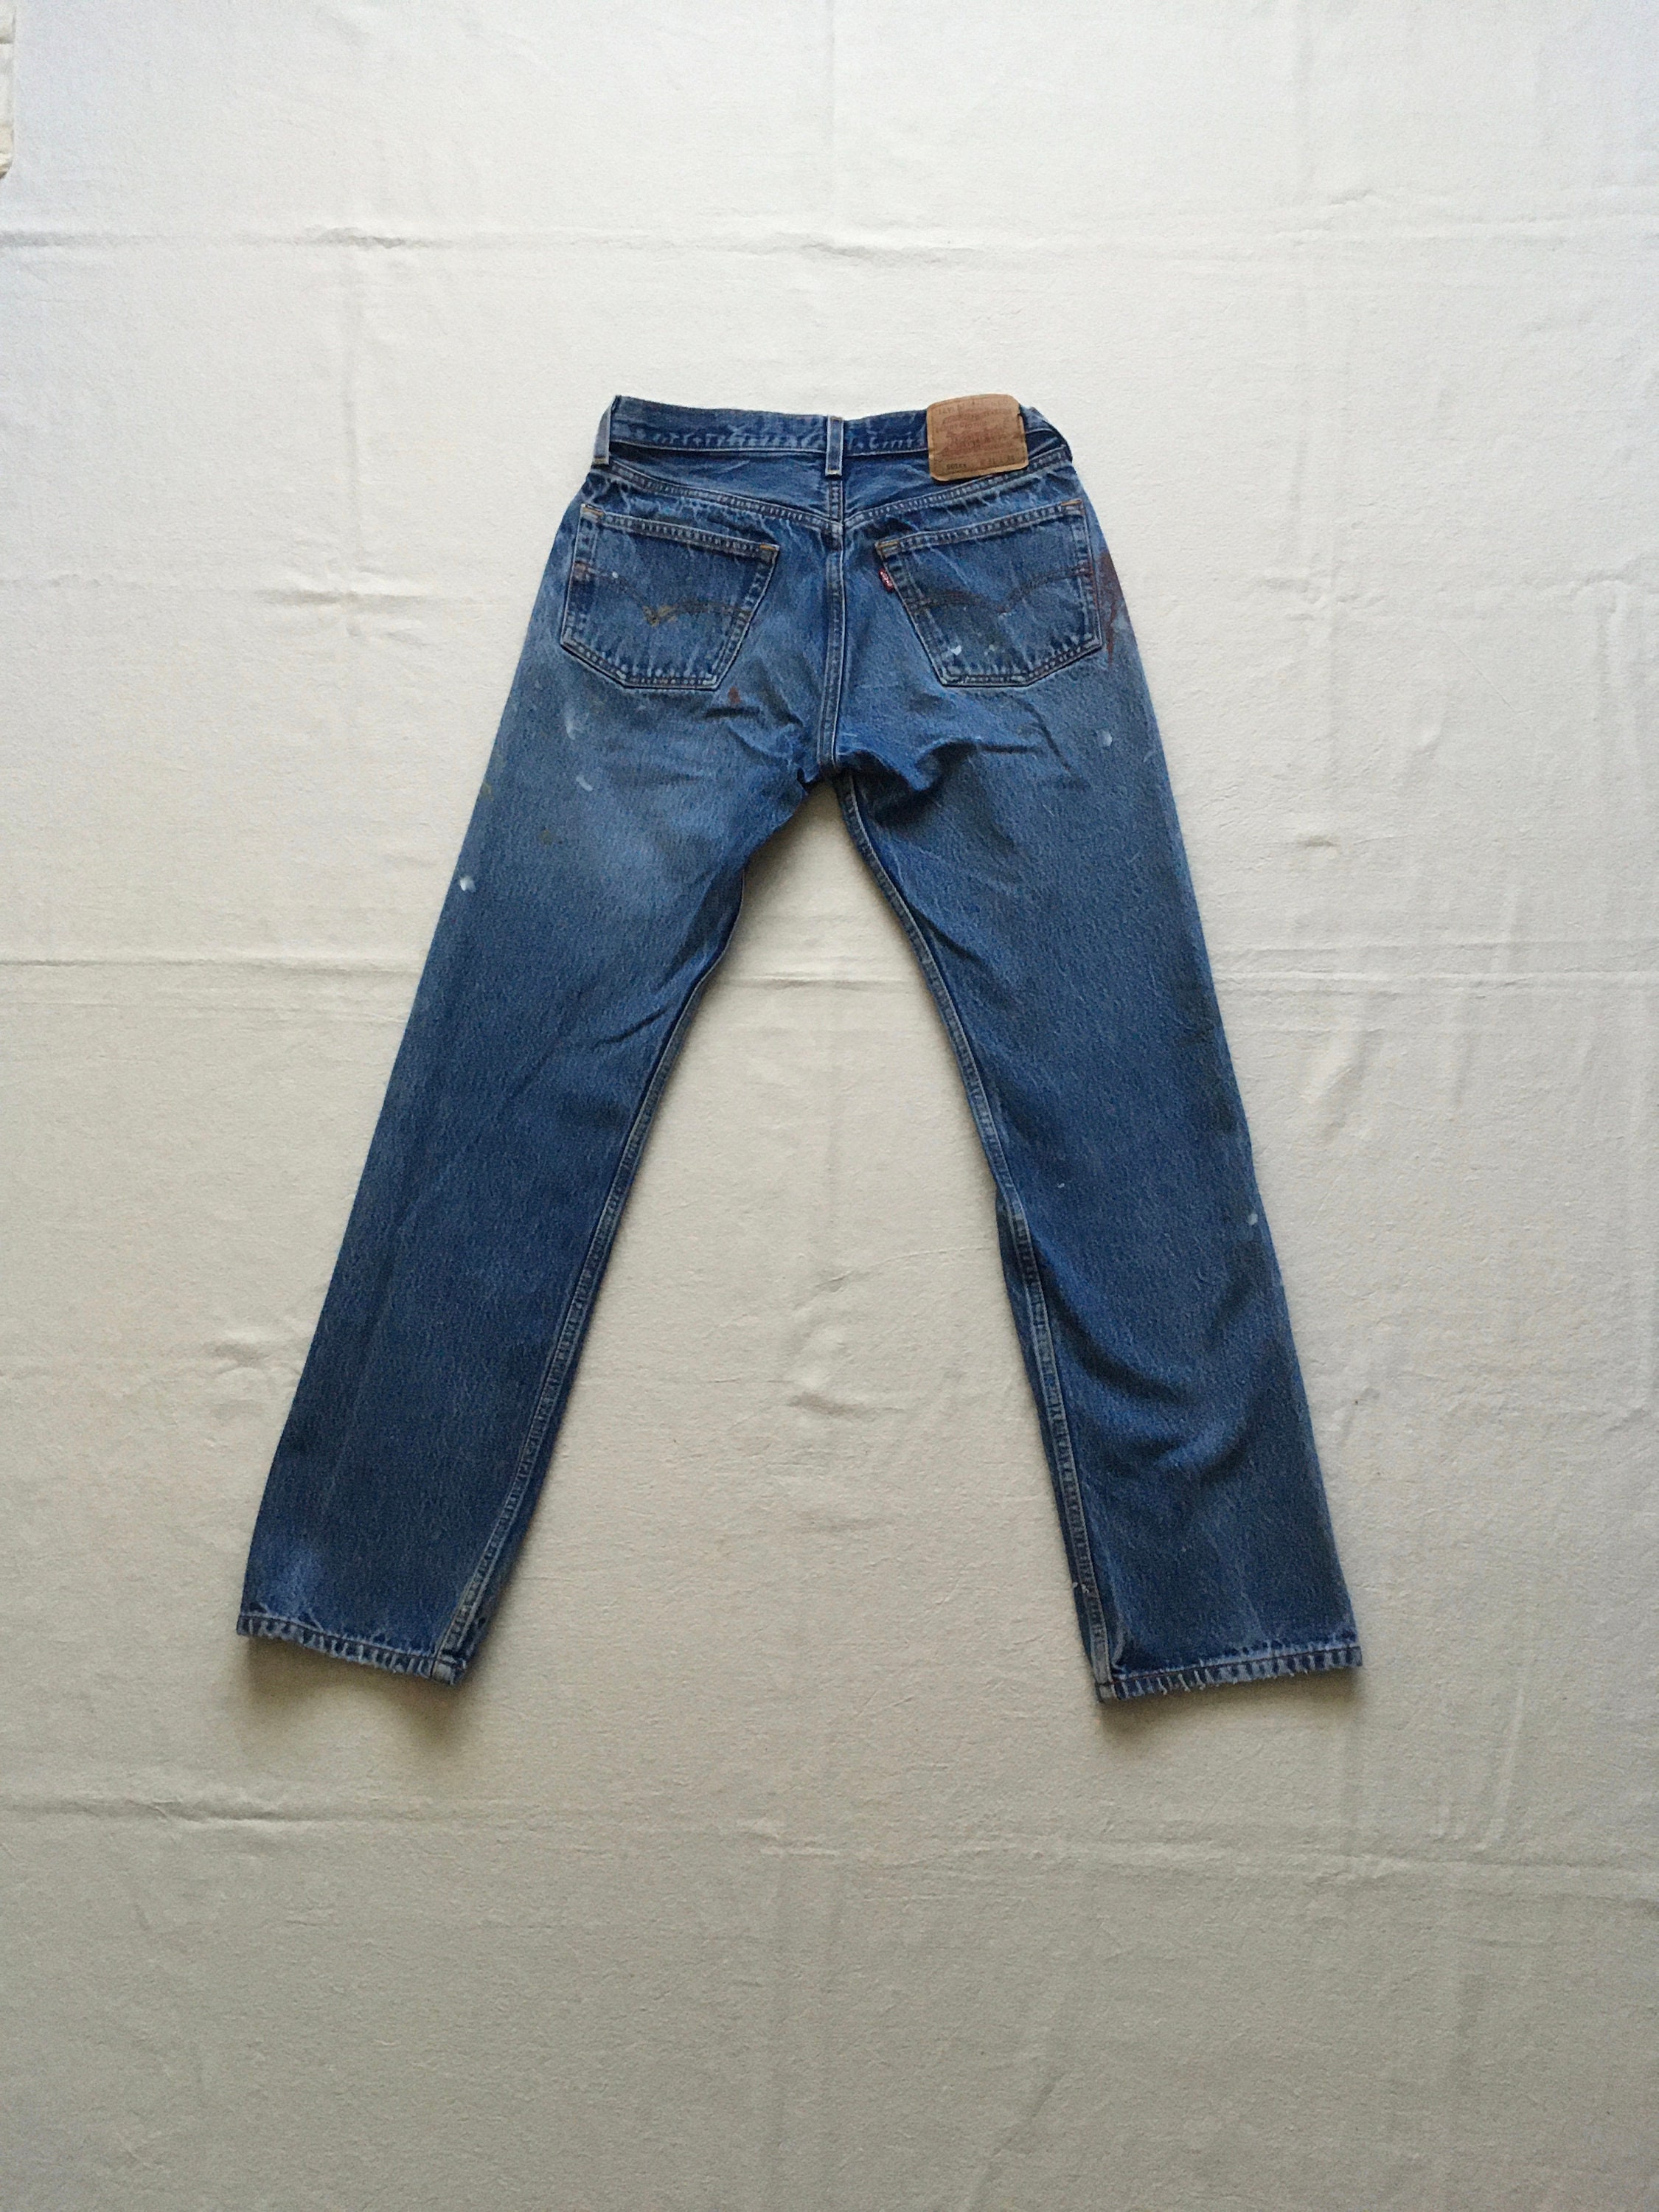 Vintage Levis 501xx Made in Usa Paint Patina Blue Jeans 30 X 30 - Etsy